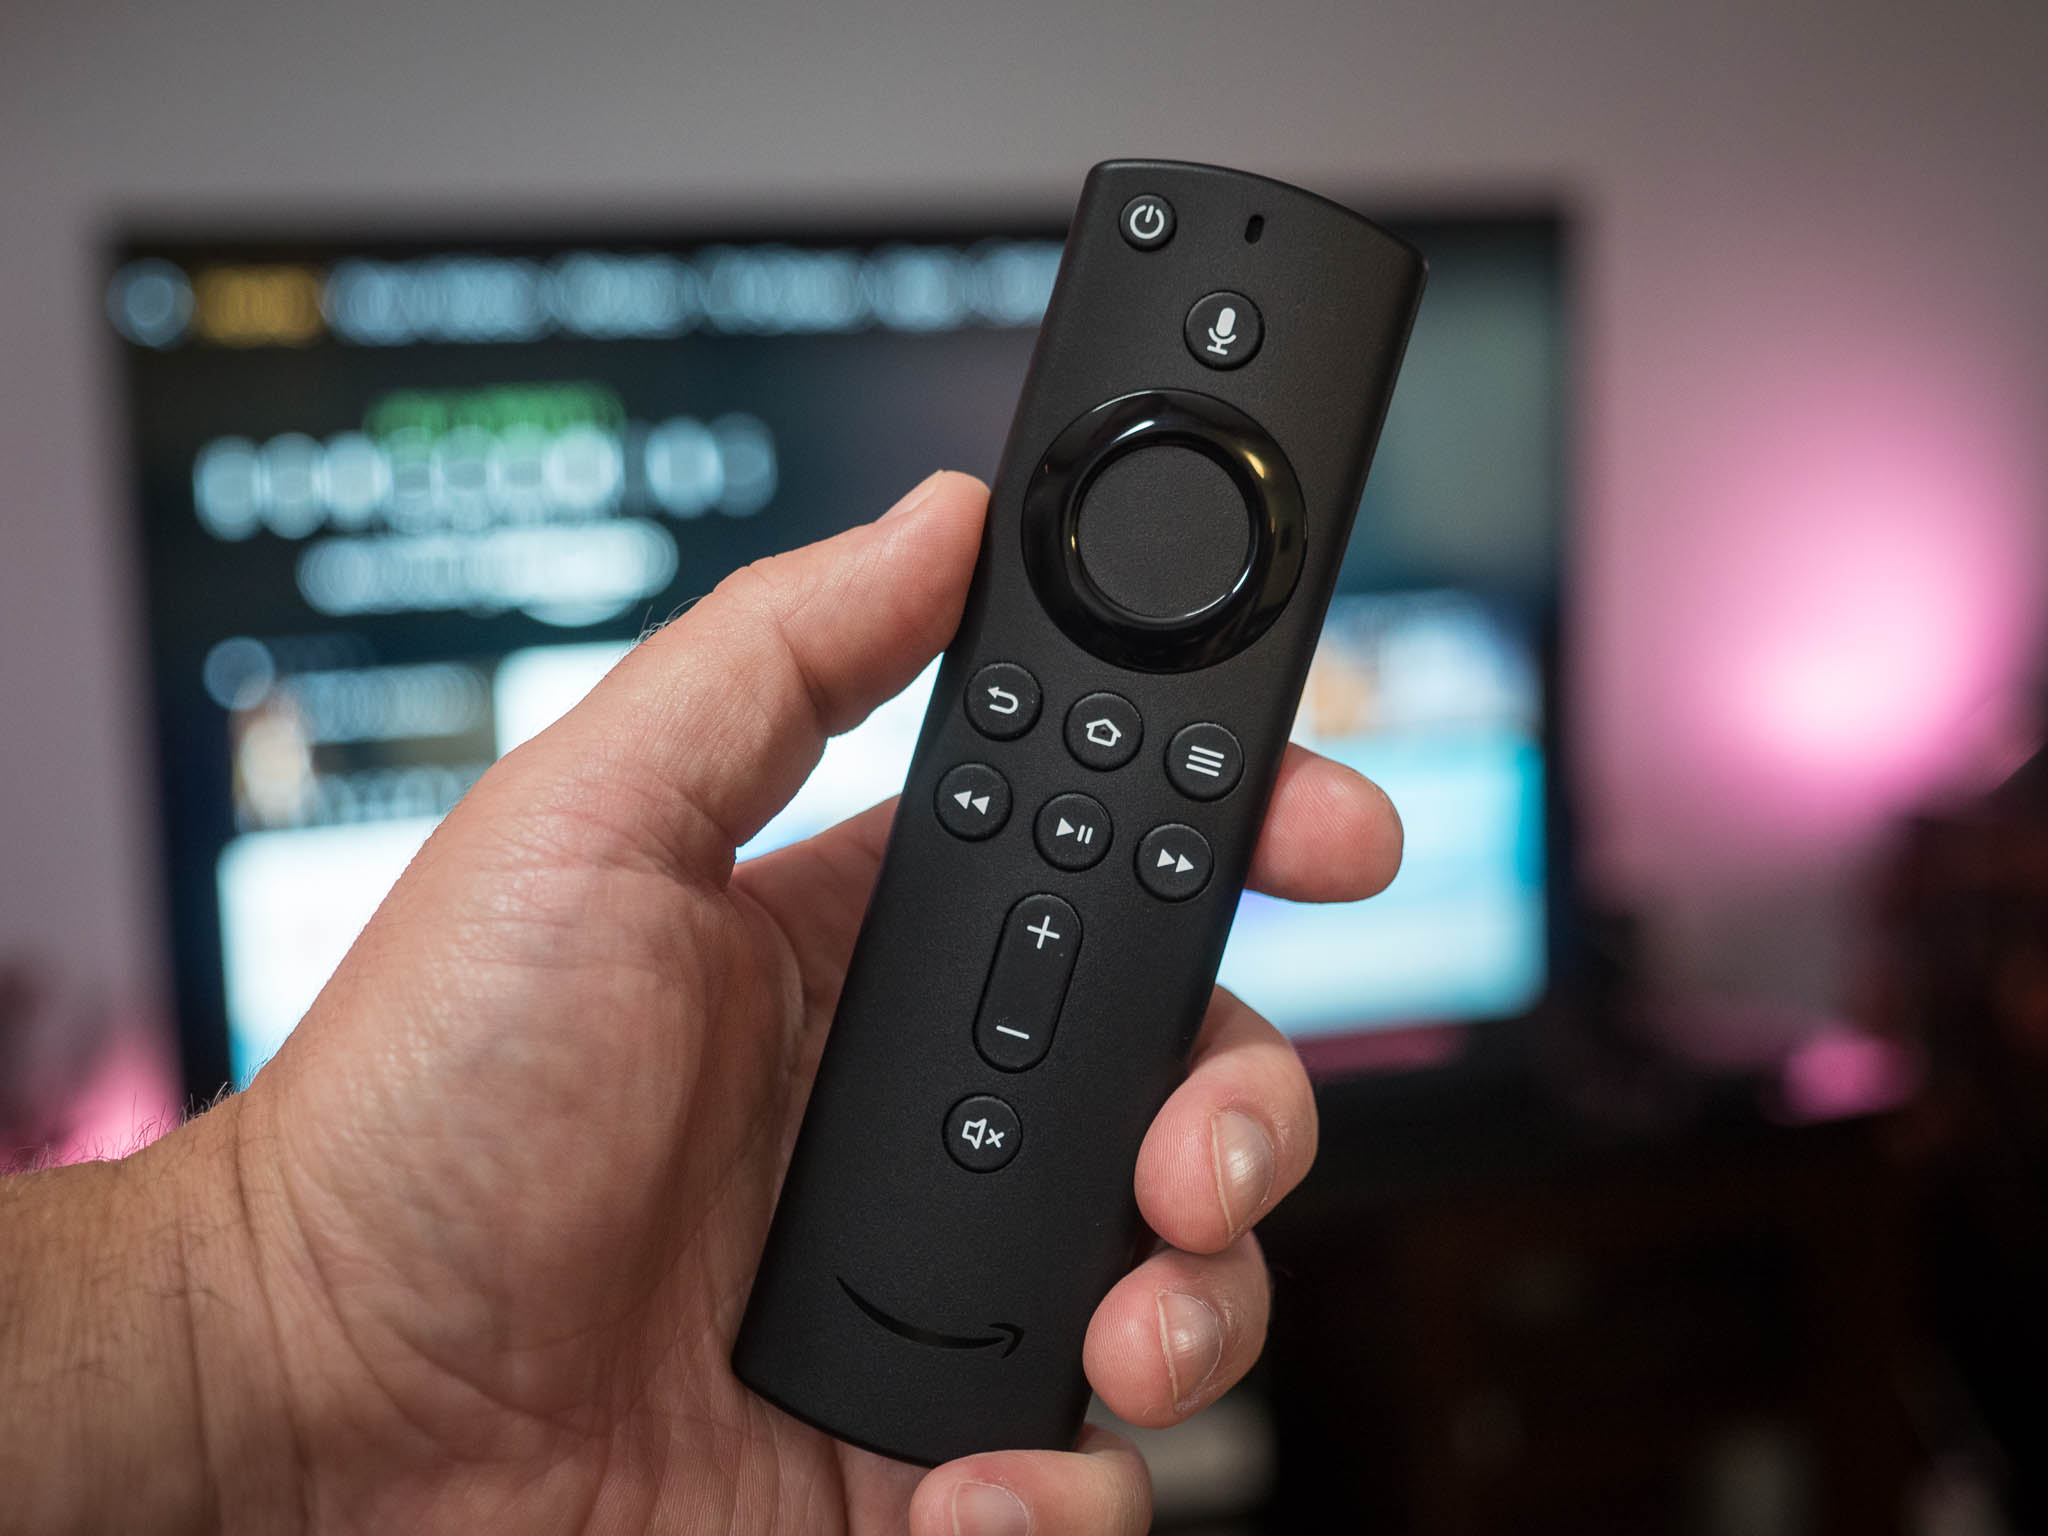 How to control your TV with Alexa: Use your Echo with a Fire TV stick